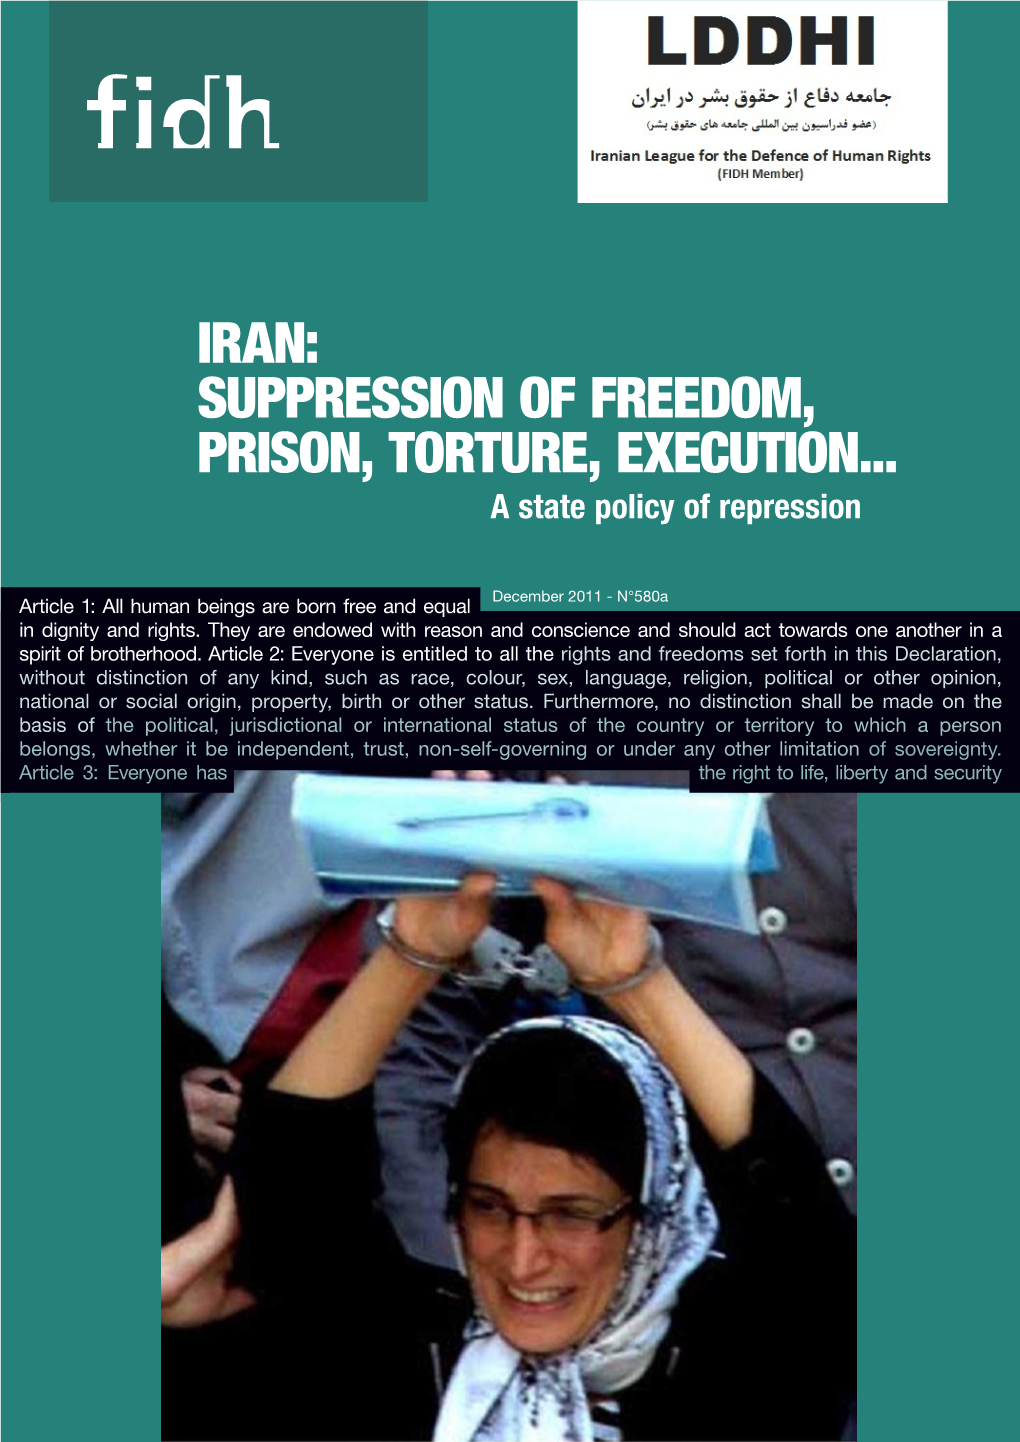 Suppression of Freedom, Prison, Torture, Execution... a State Policy of Repression